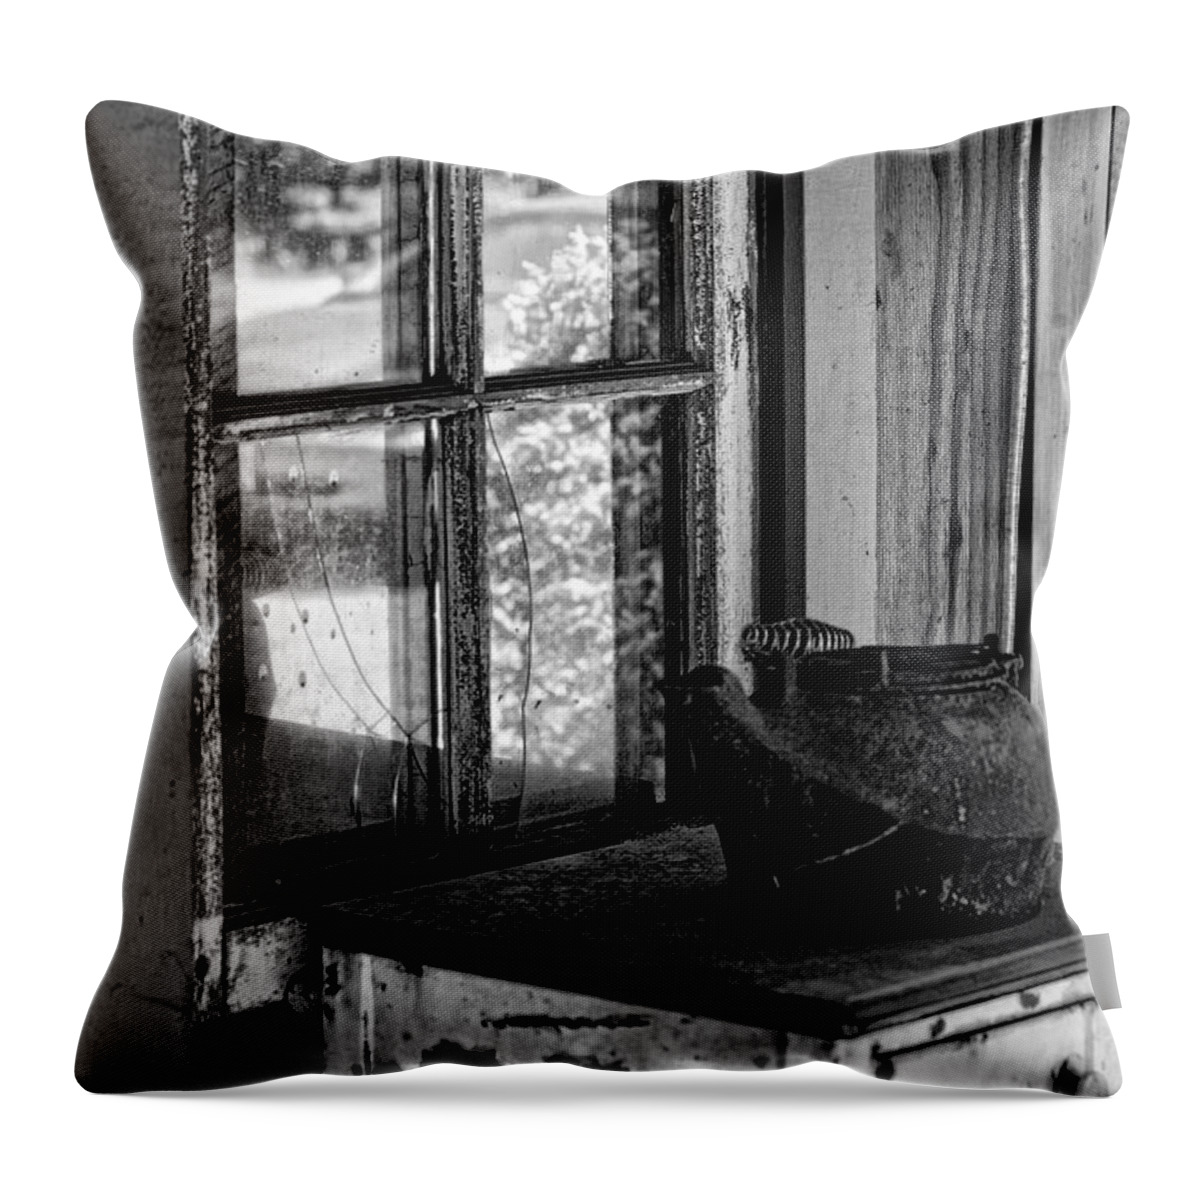 Antique Stove Throw Pillow featuring the photograph Antique Stove on Porch by Bonnie Bruno